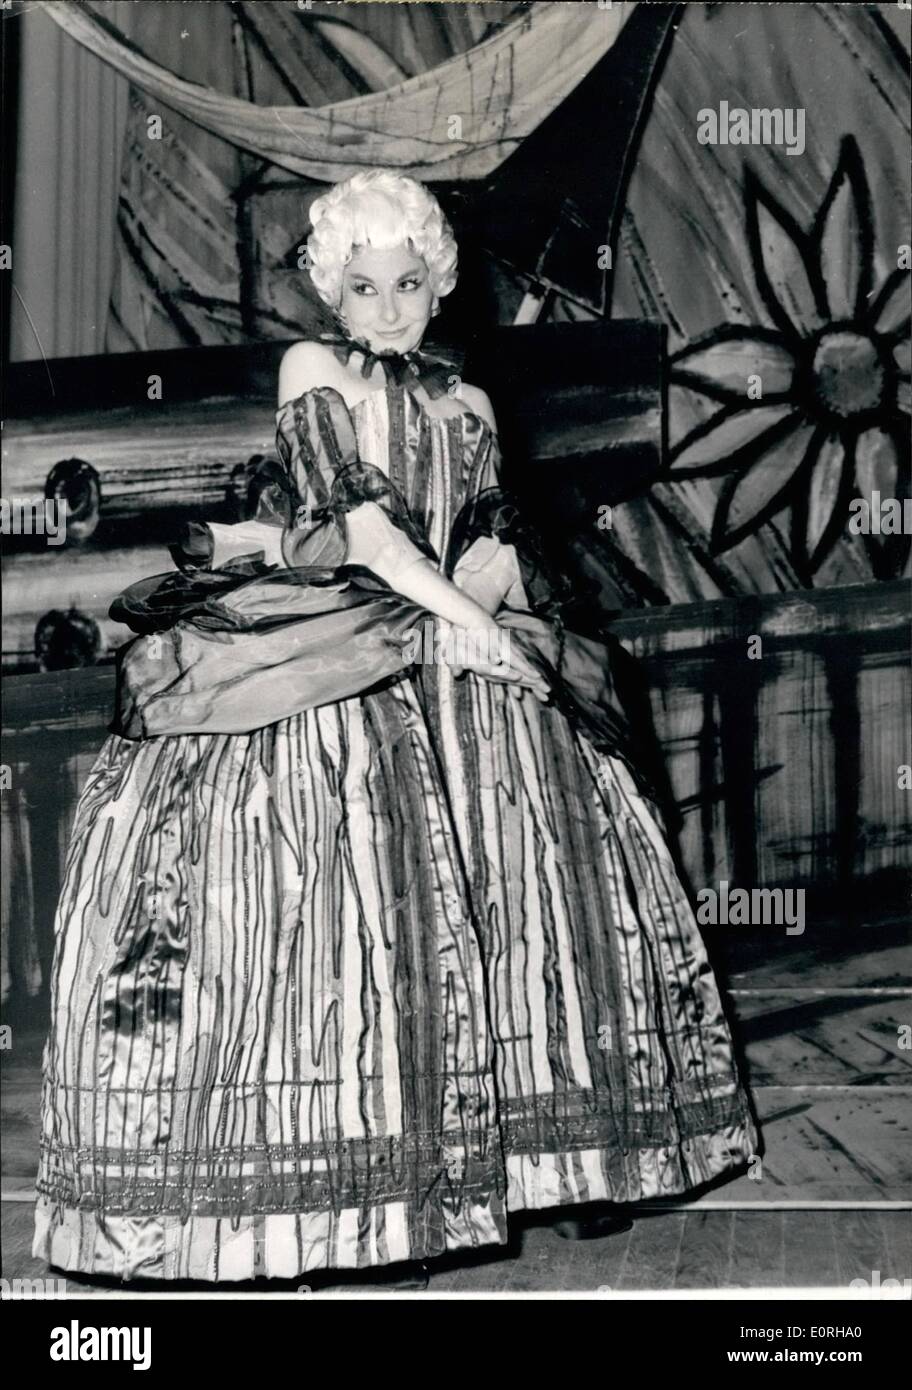 Sep. 09, 1959 - MUSICAL COMEDY STARRING ZIZI JEAN+AIRE TO OPEN AT SARAH BERNHARDT THEATER A MUSICAL COMEDY BY MARCEL AYME ''PATRON'' (THE BOSS) STARRING ZIZI JEANMAIRE AND PHILIPPE LEMAIRE IS OPENING AT THE SARAH BERNHARDT THEATER, EX PARIS, TONIGHT. PHOTO SHOWS ZIZI JEANMAIRE IN A SCENE OF THE PLAY. Stock Photo